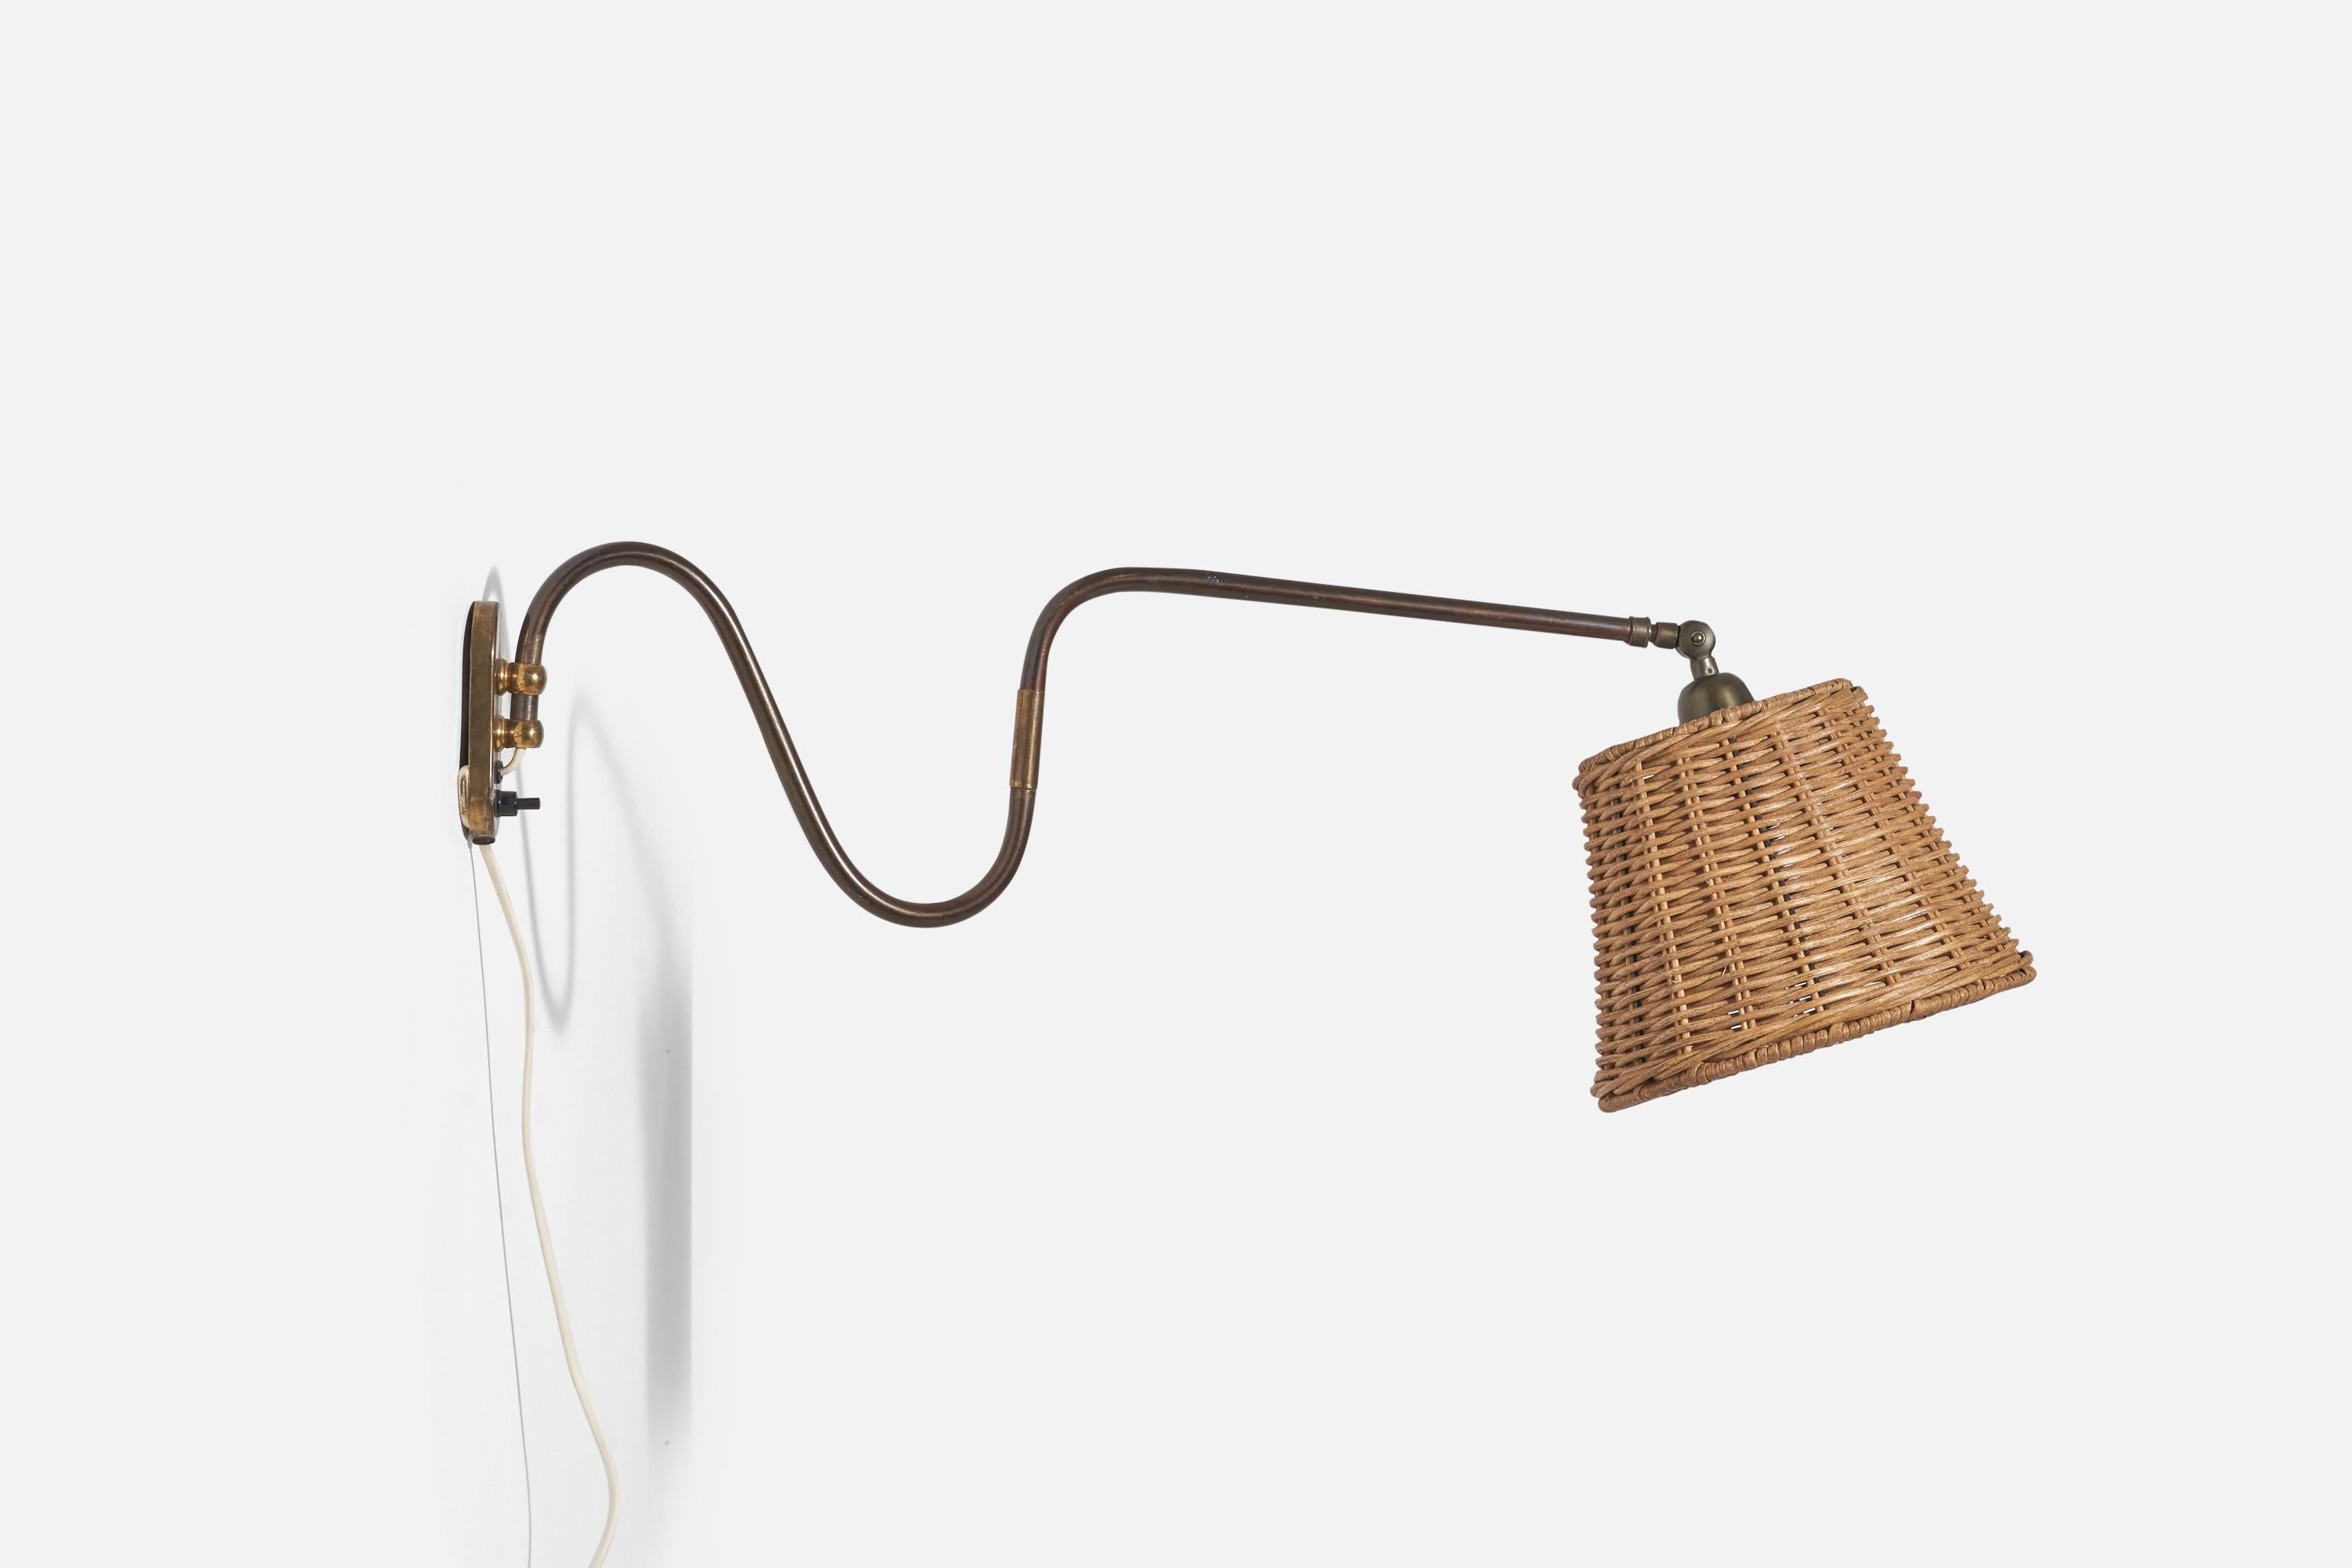 A brass and rattan wall light designed and produced in Denmark, 1940s.

Dimensions variable, measured as illustrated in first image.

Sold with Lampshade. Dimensions stated are of Sconce with Lampshade. 

Socket takes standard E-26 medium base